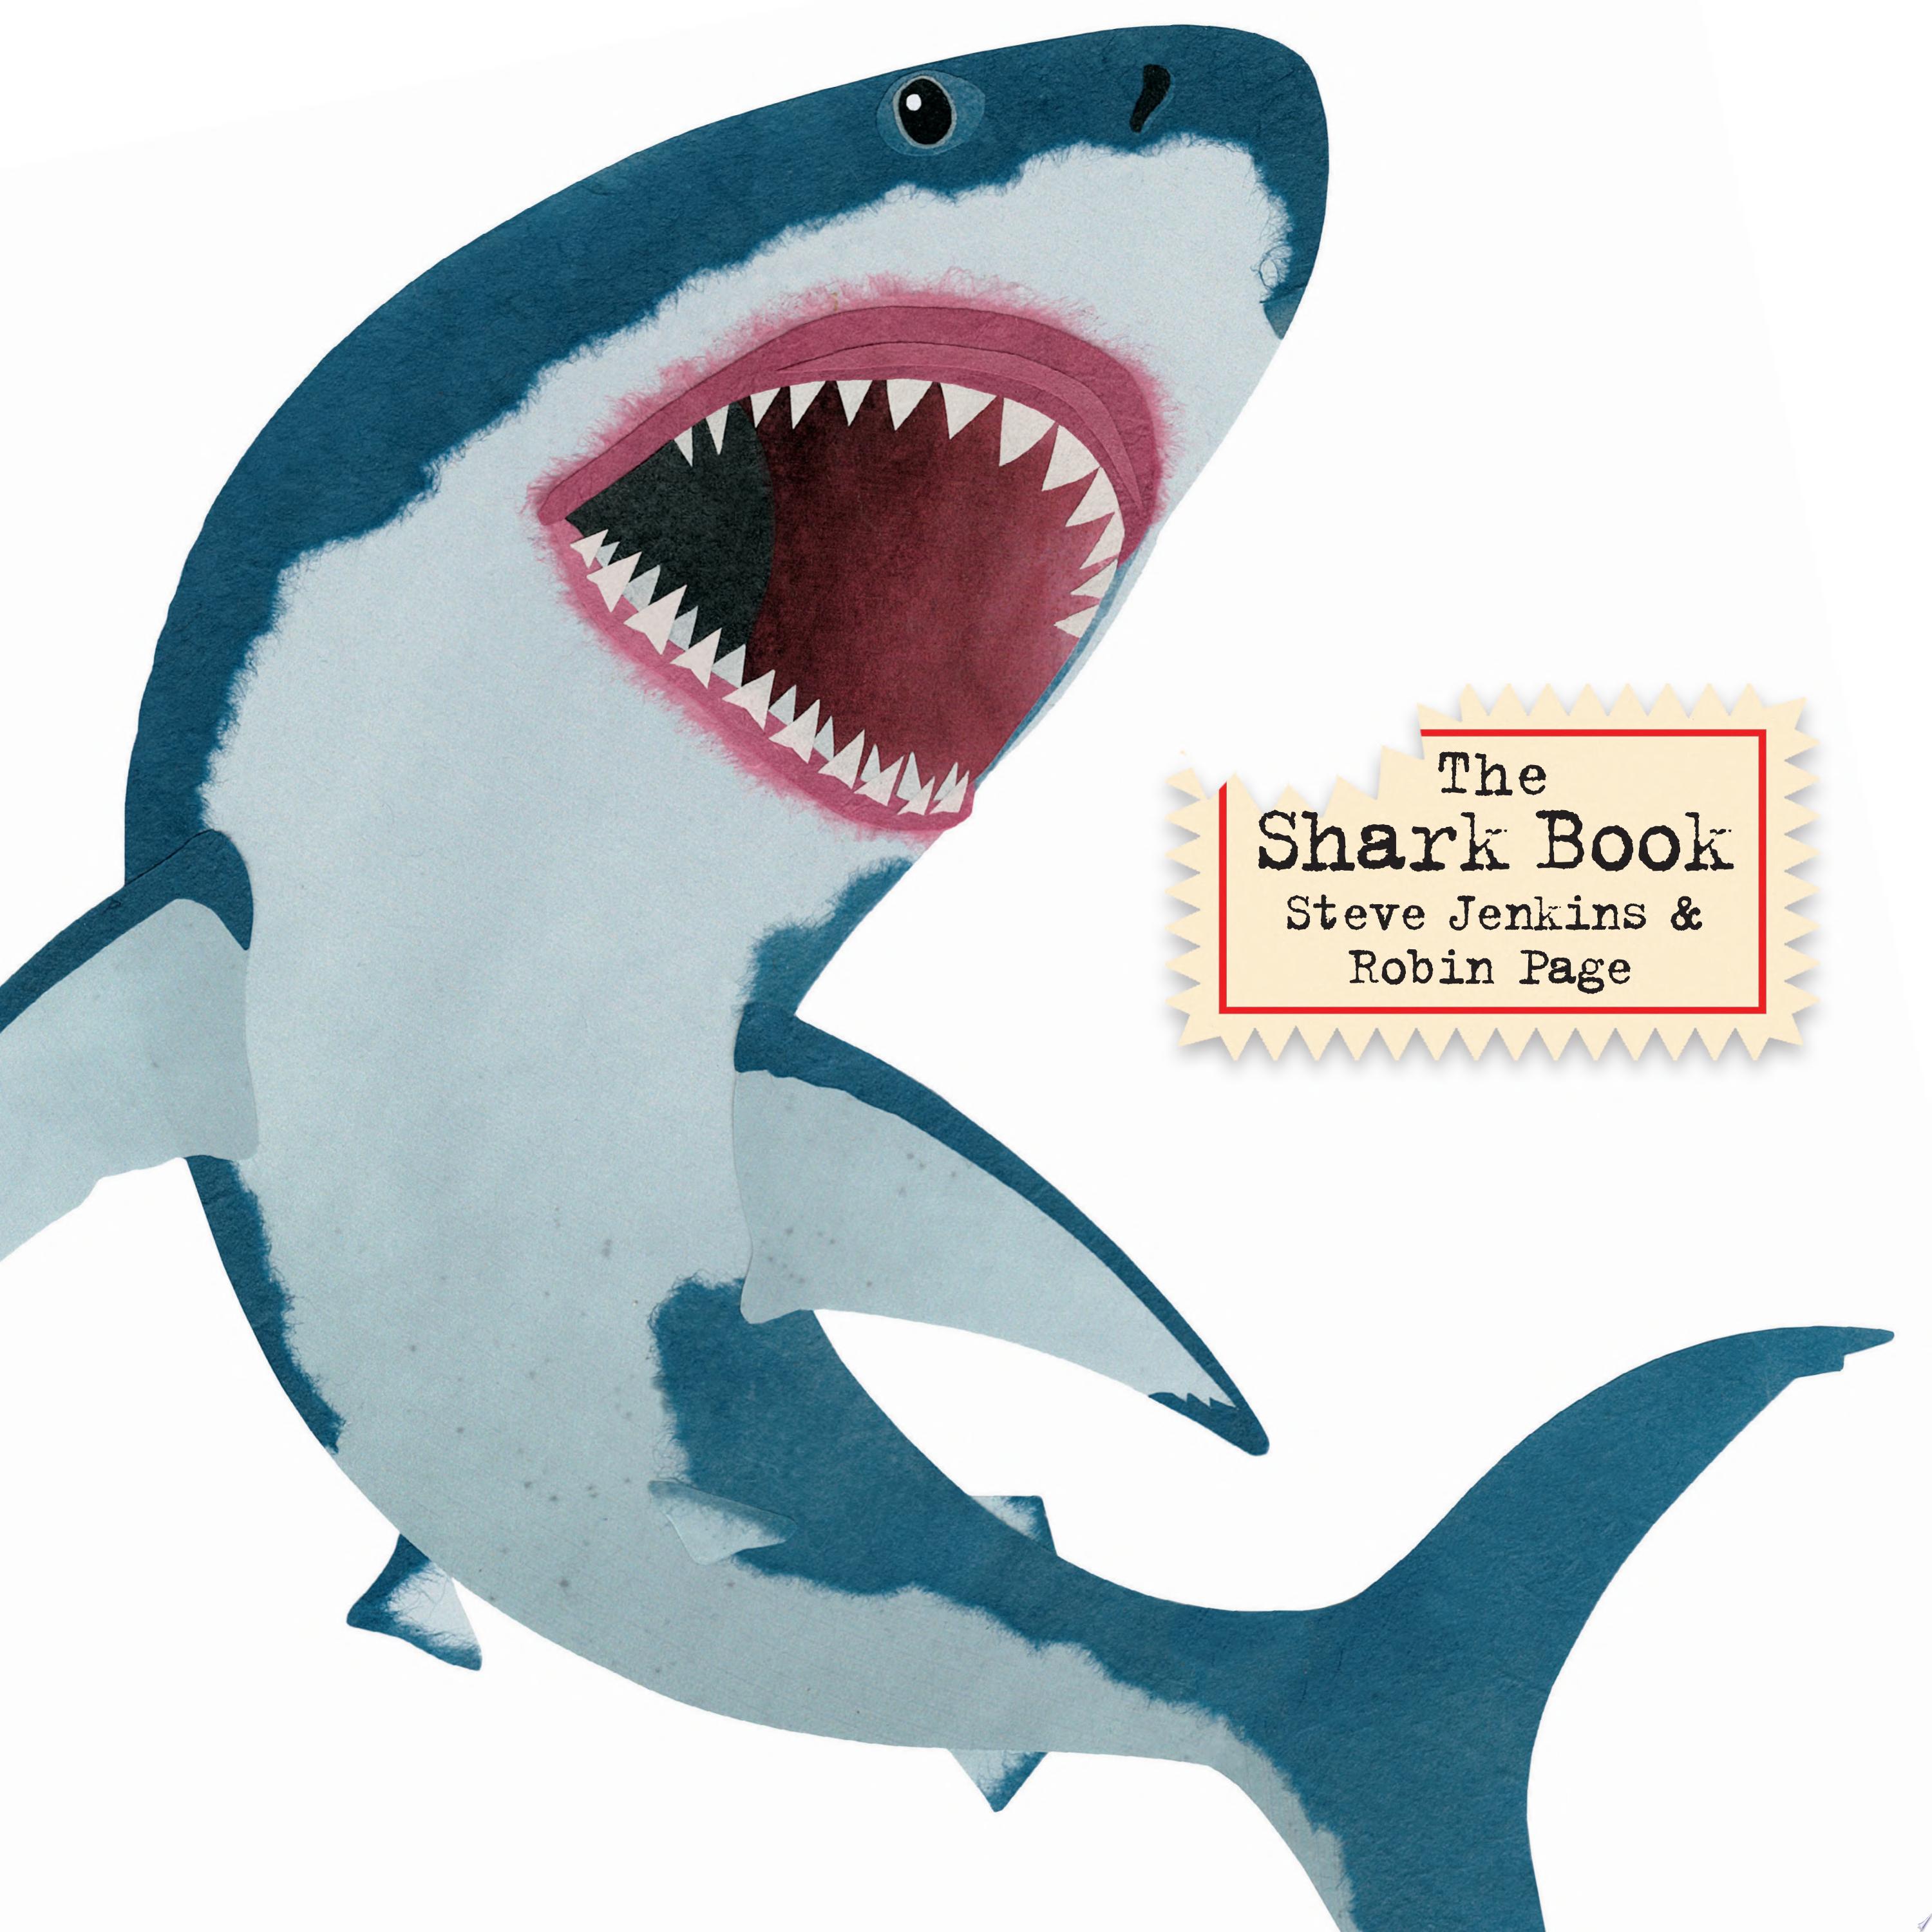 Image for "The Shark Book"